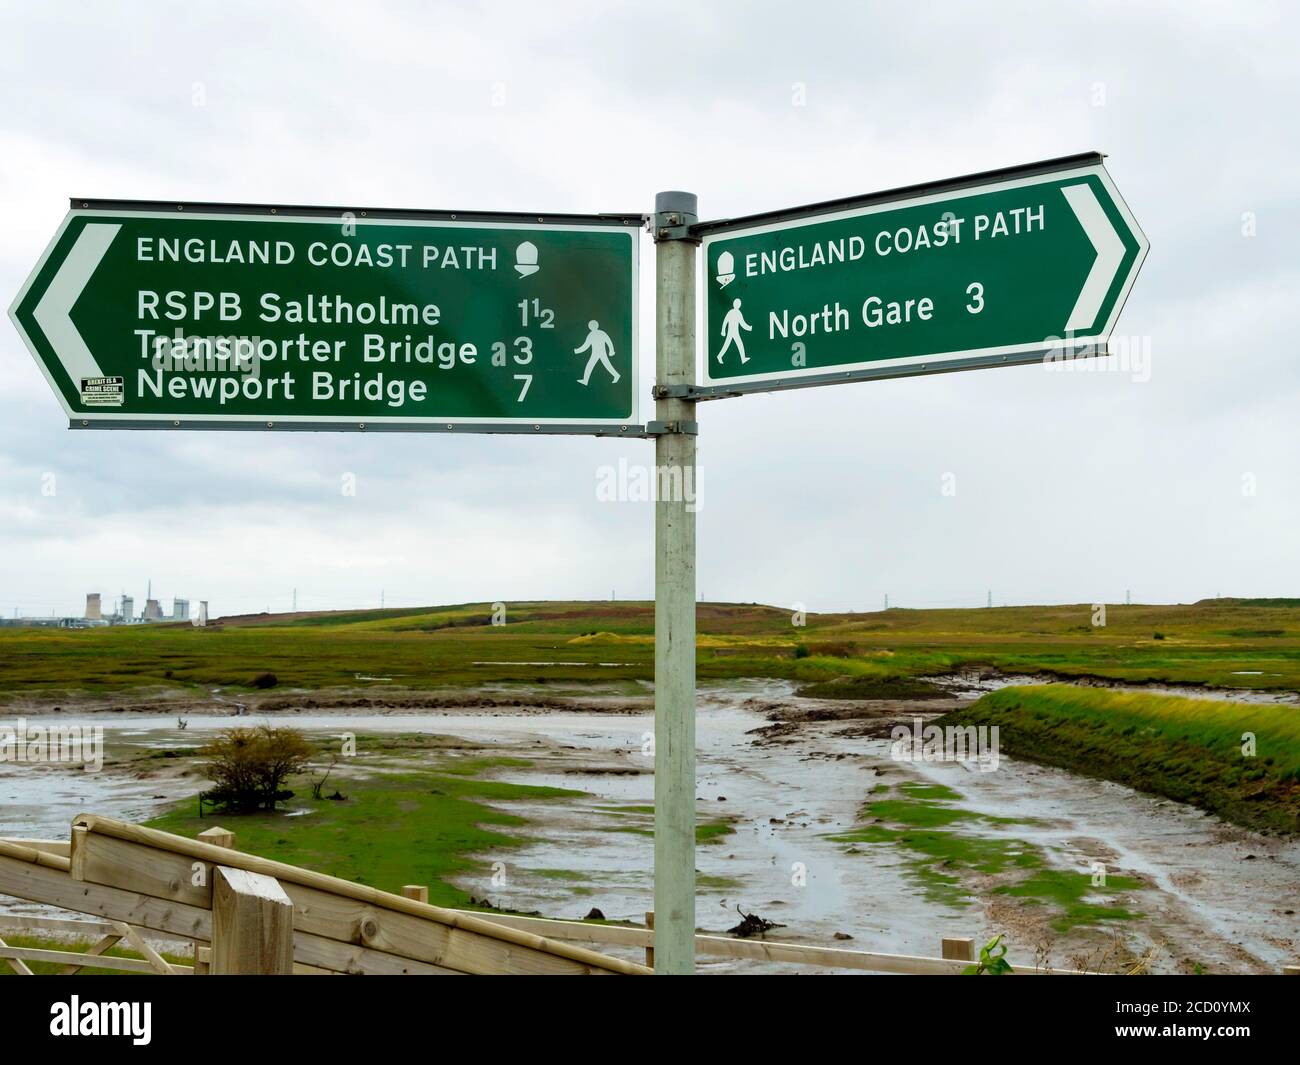 England Coast Path National Trail signpost Seaton Carew,  pointing west to RSPB Saltholme Transporter bridge and Newprt Bridge and east to North Gare Stock Photo